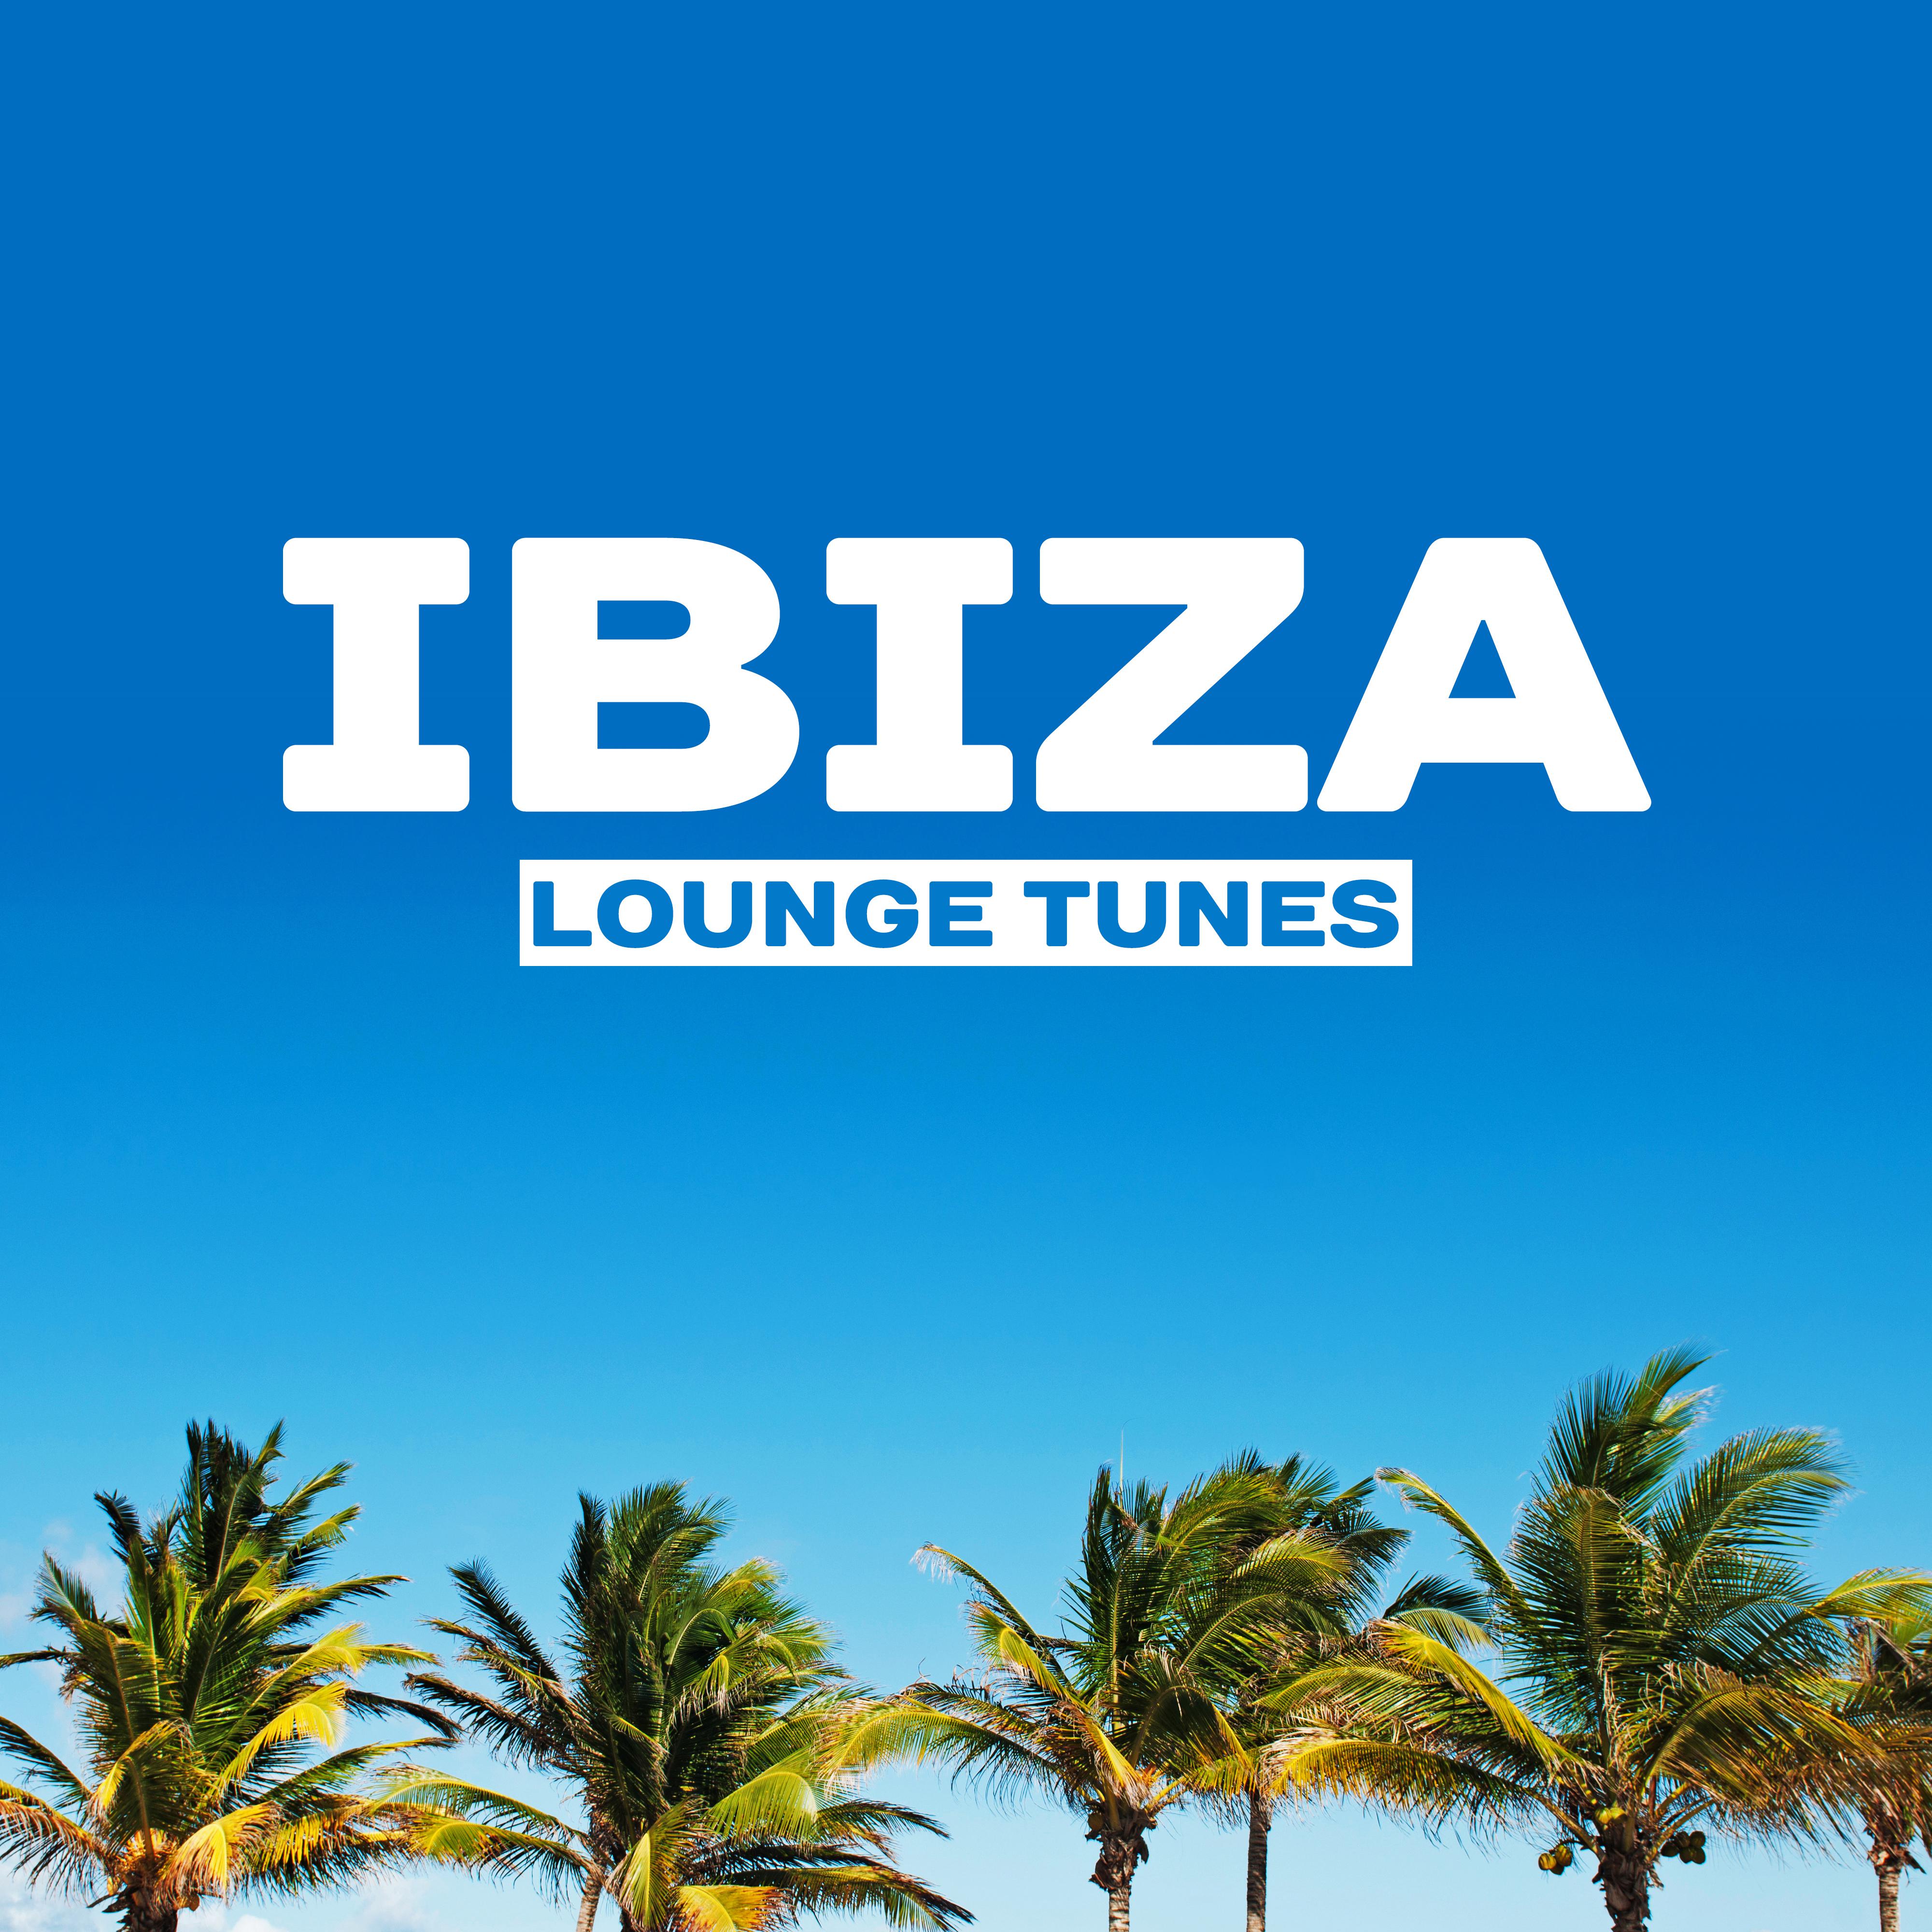 Ibiza Lounge Tunes  The Best Chill Out Music, Ibiza Lounge, Summer Vibes, Summertime Sounds